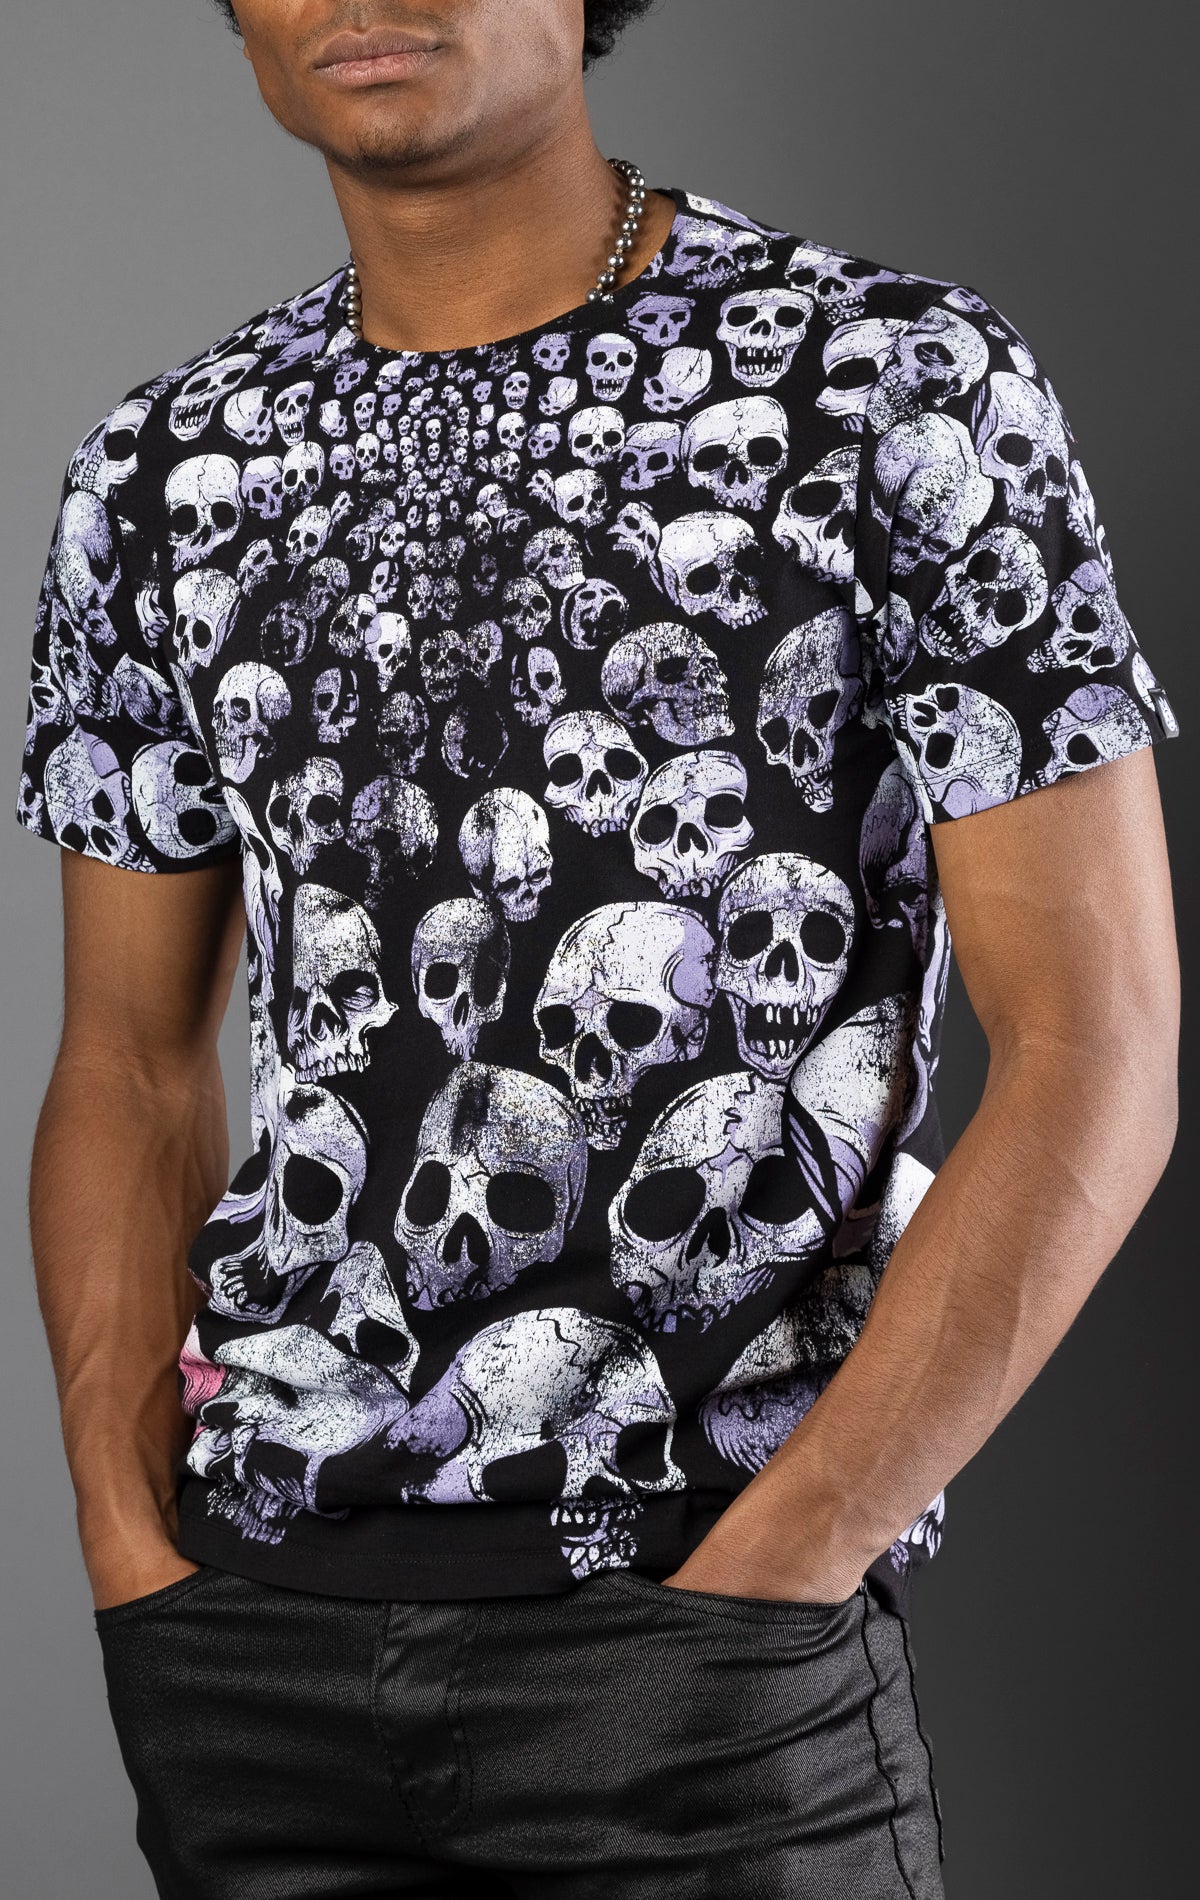 Black cotton tee with distressed all-over repeat skull print